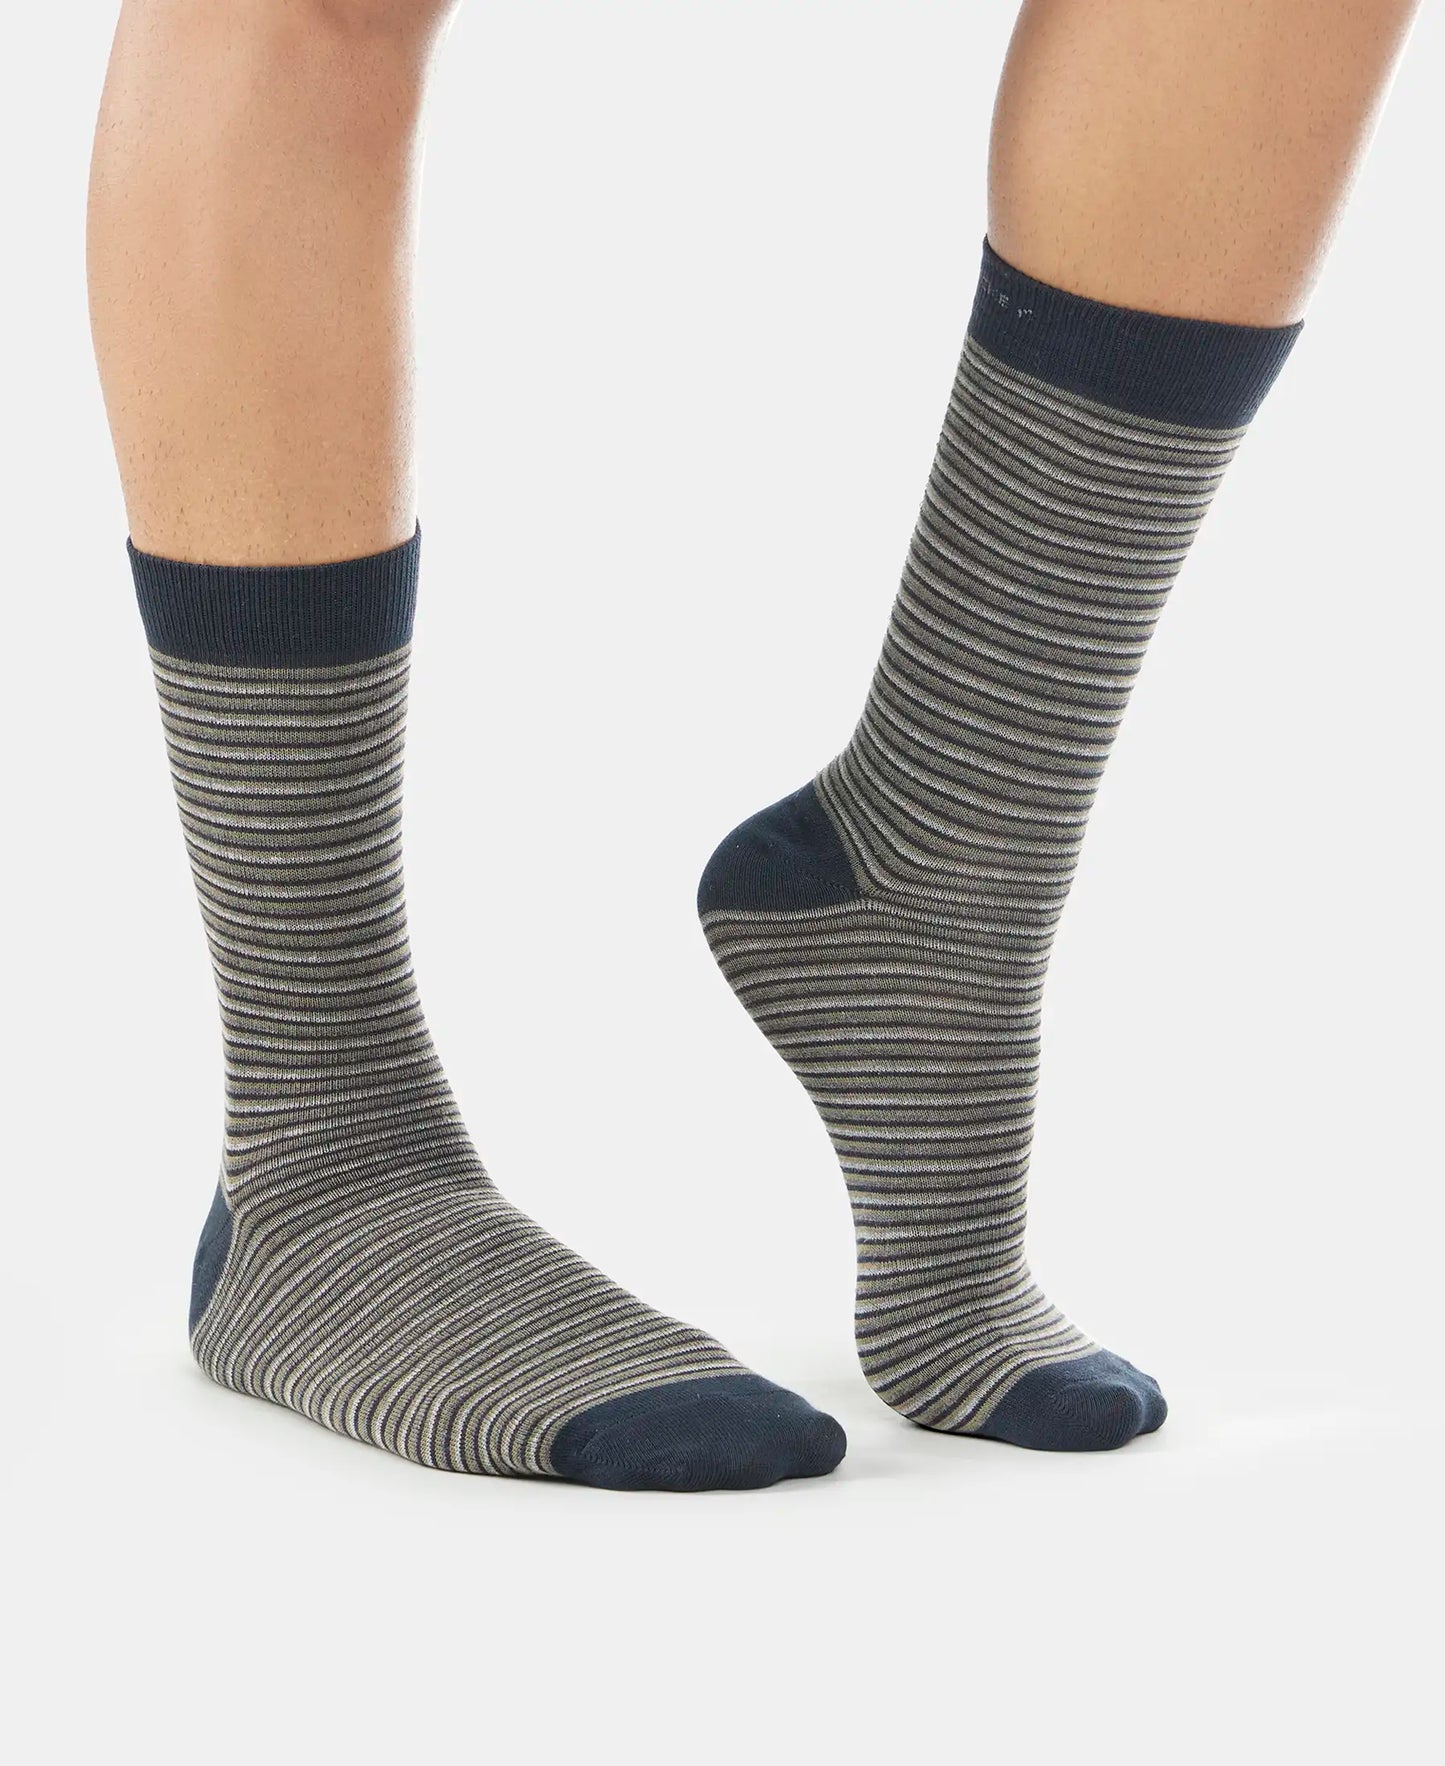 Compact Cotton Crew Length Socks with StayFresh Treatment - Black-11